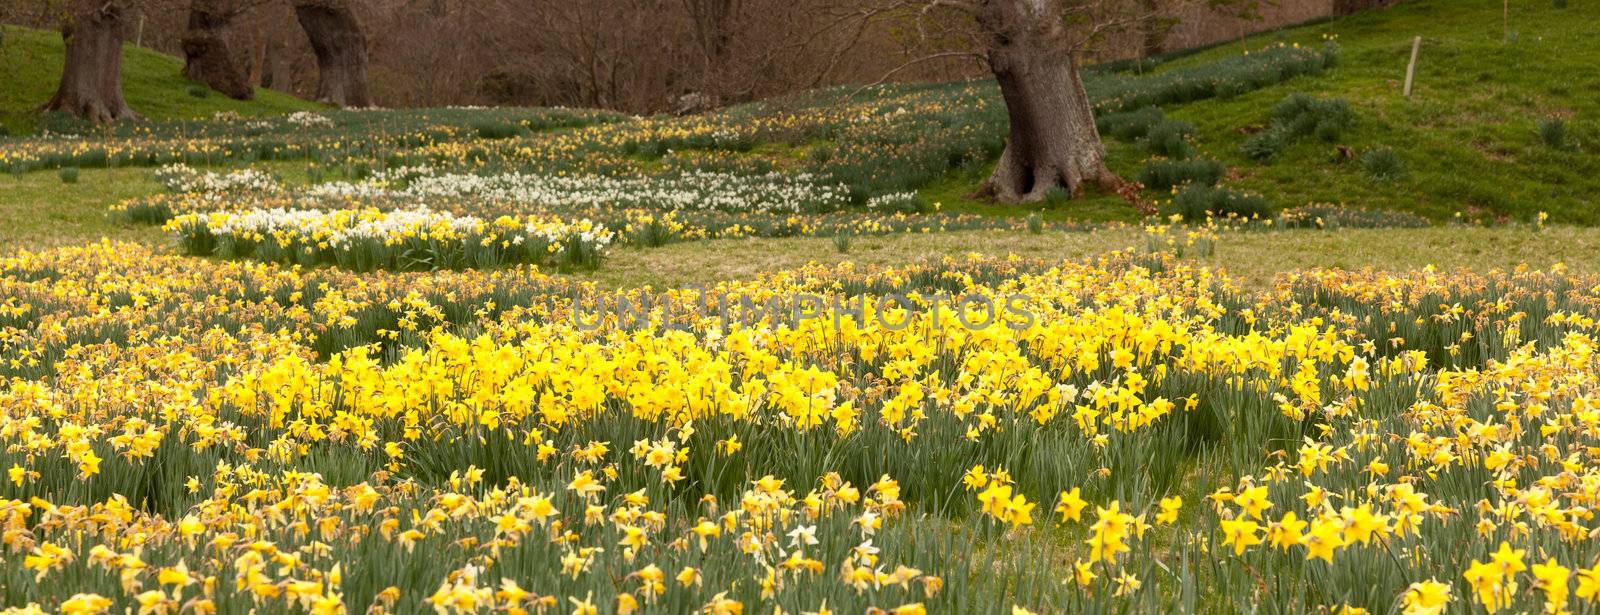 Daffodils surround trees in rural setting by steheap